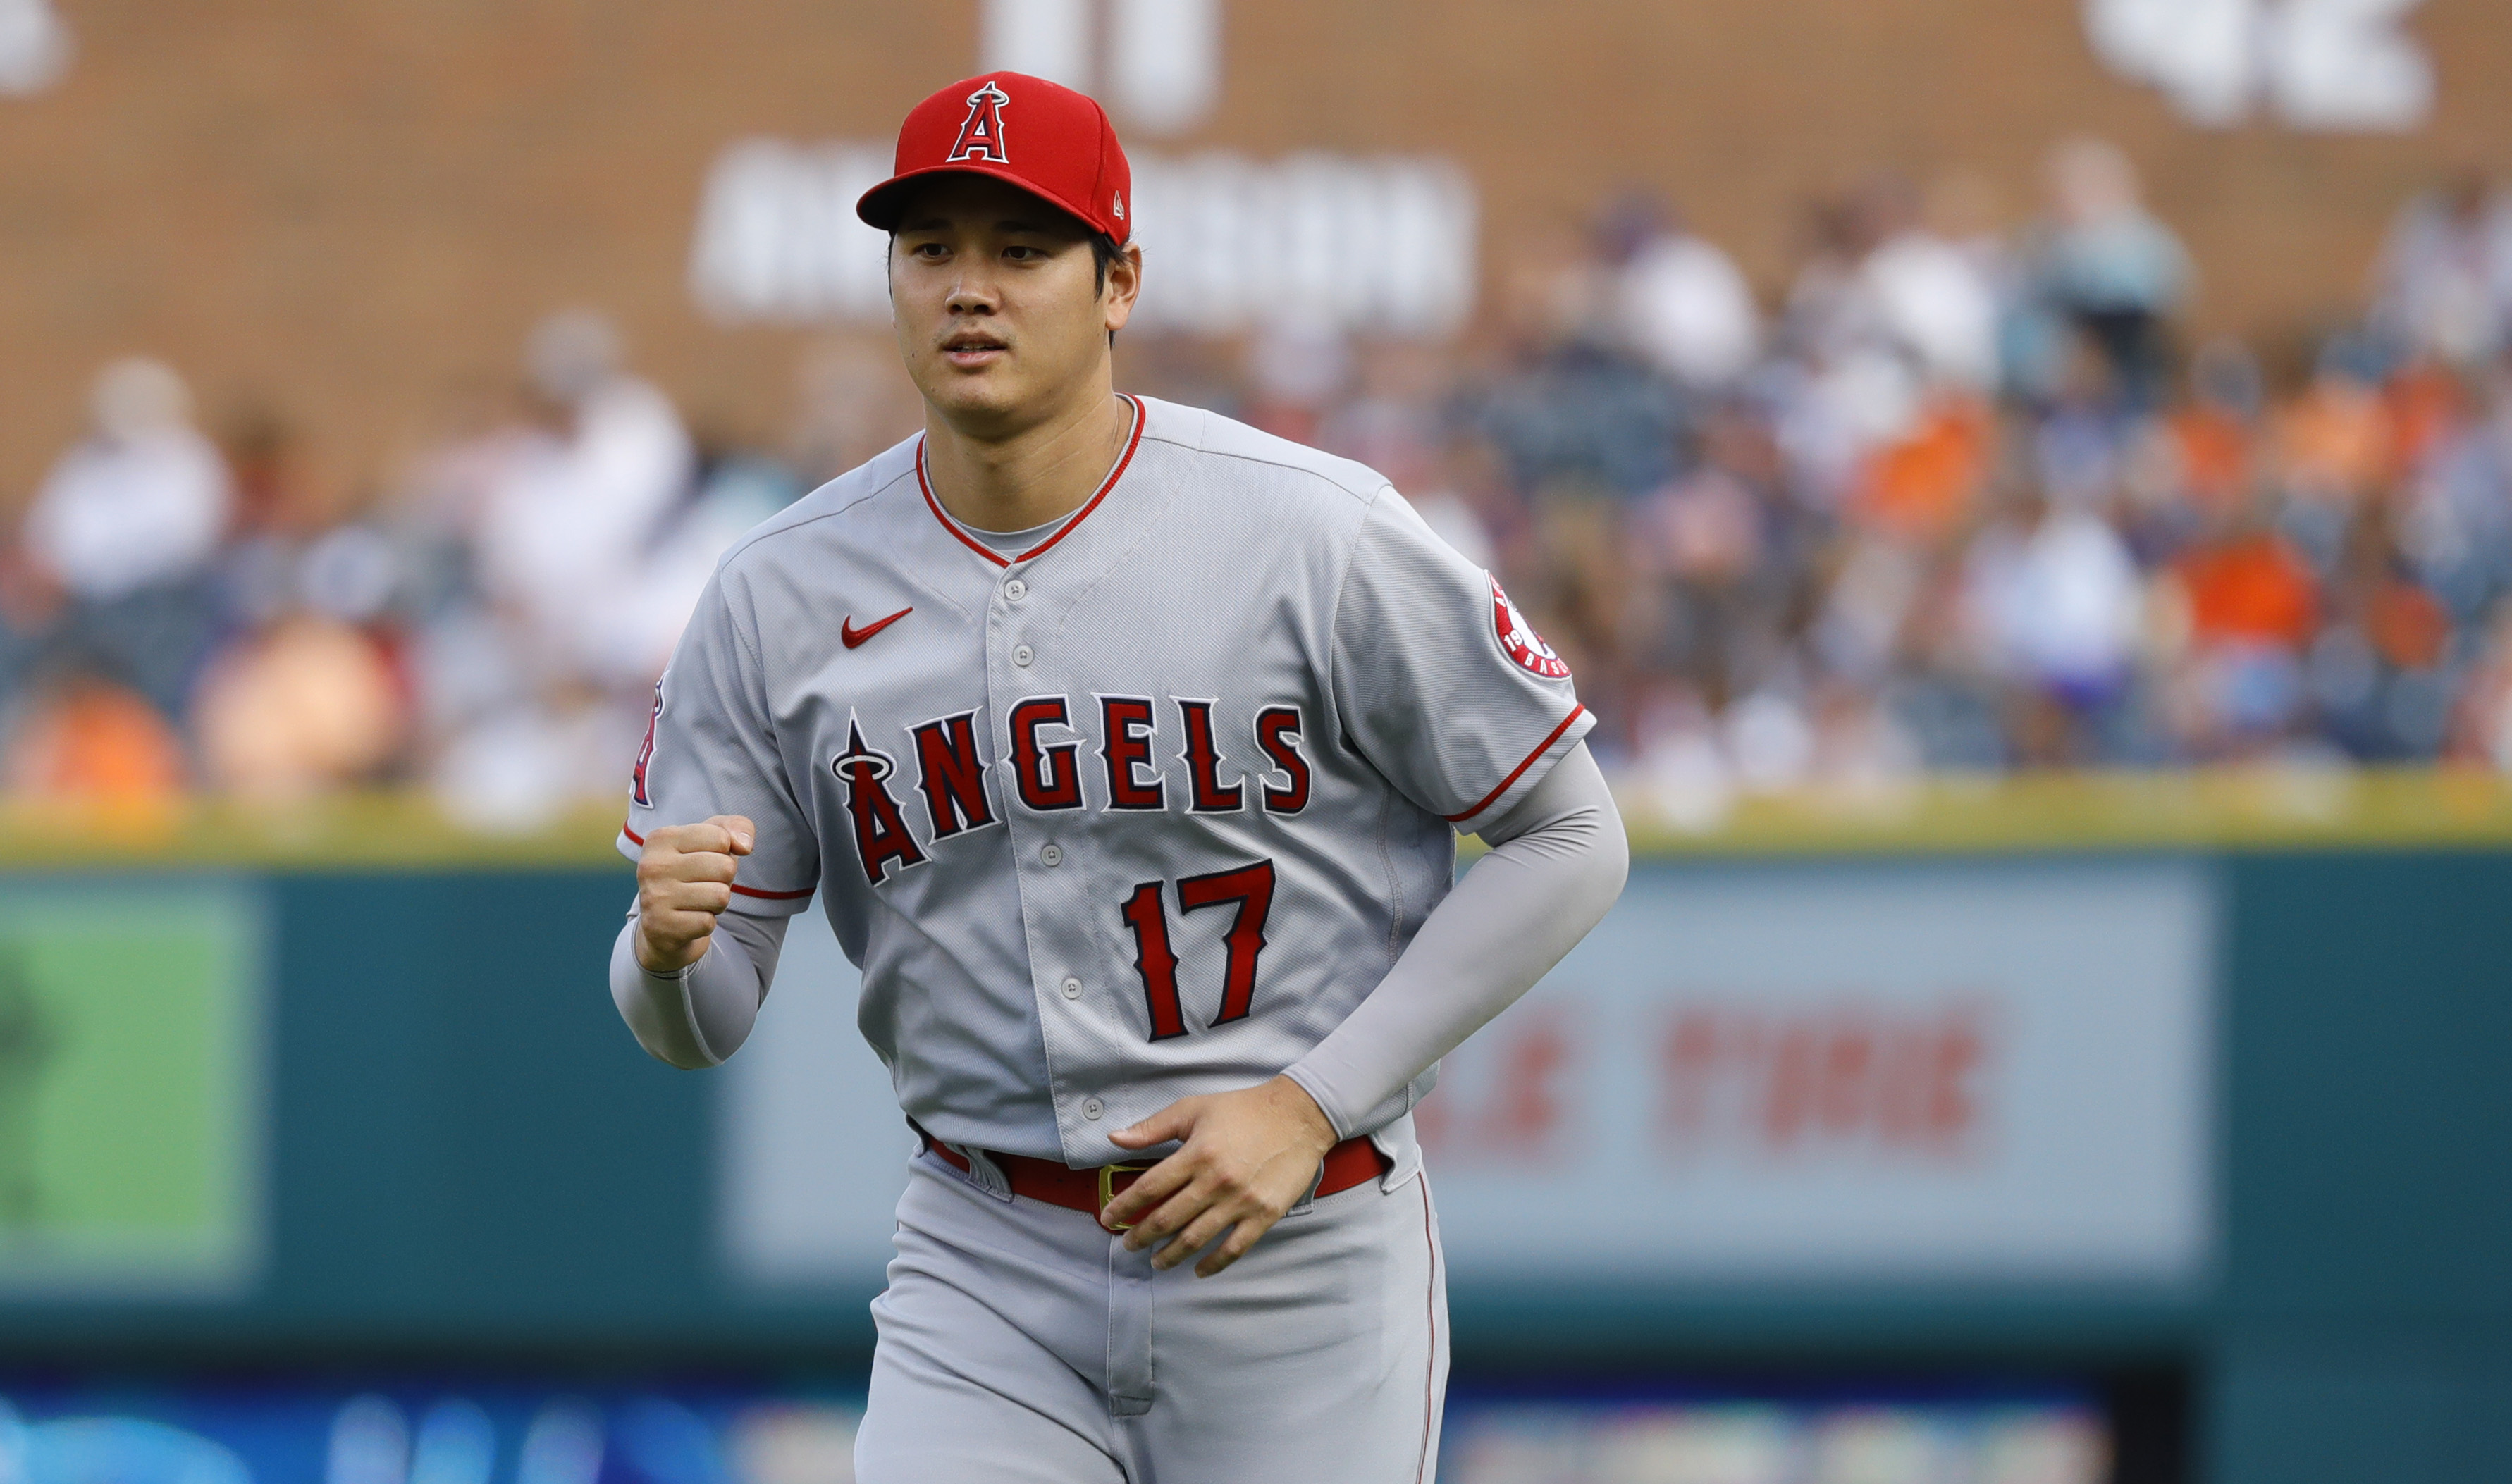 What did Jack Morris say about Shohei Ohtani?